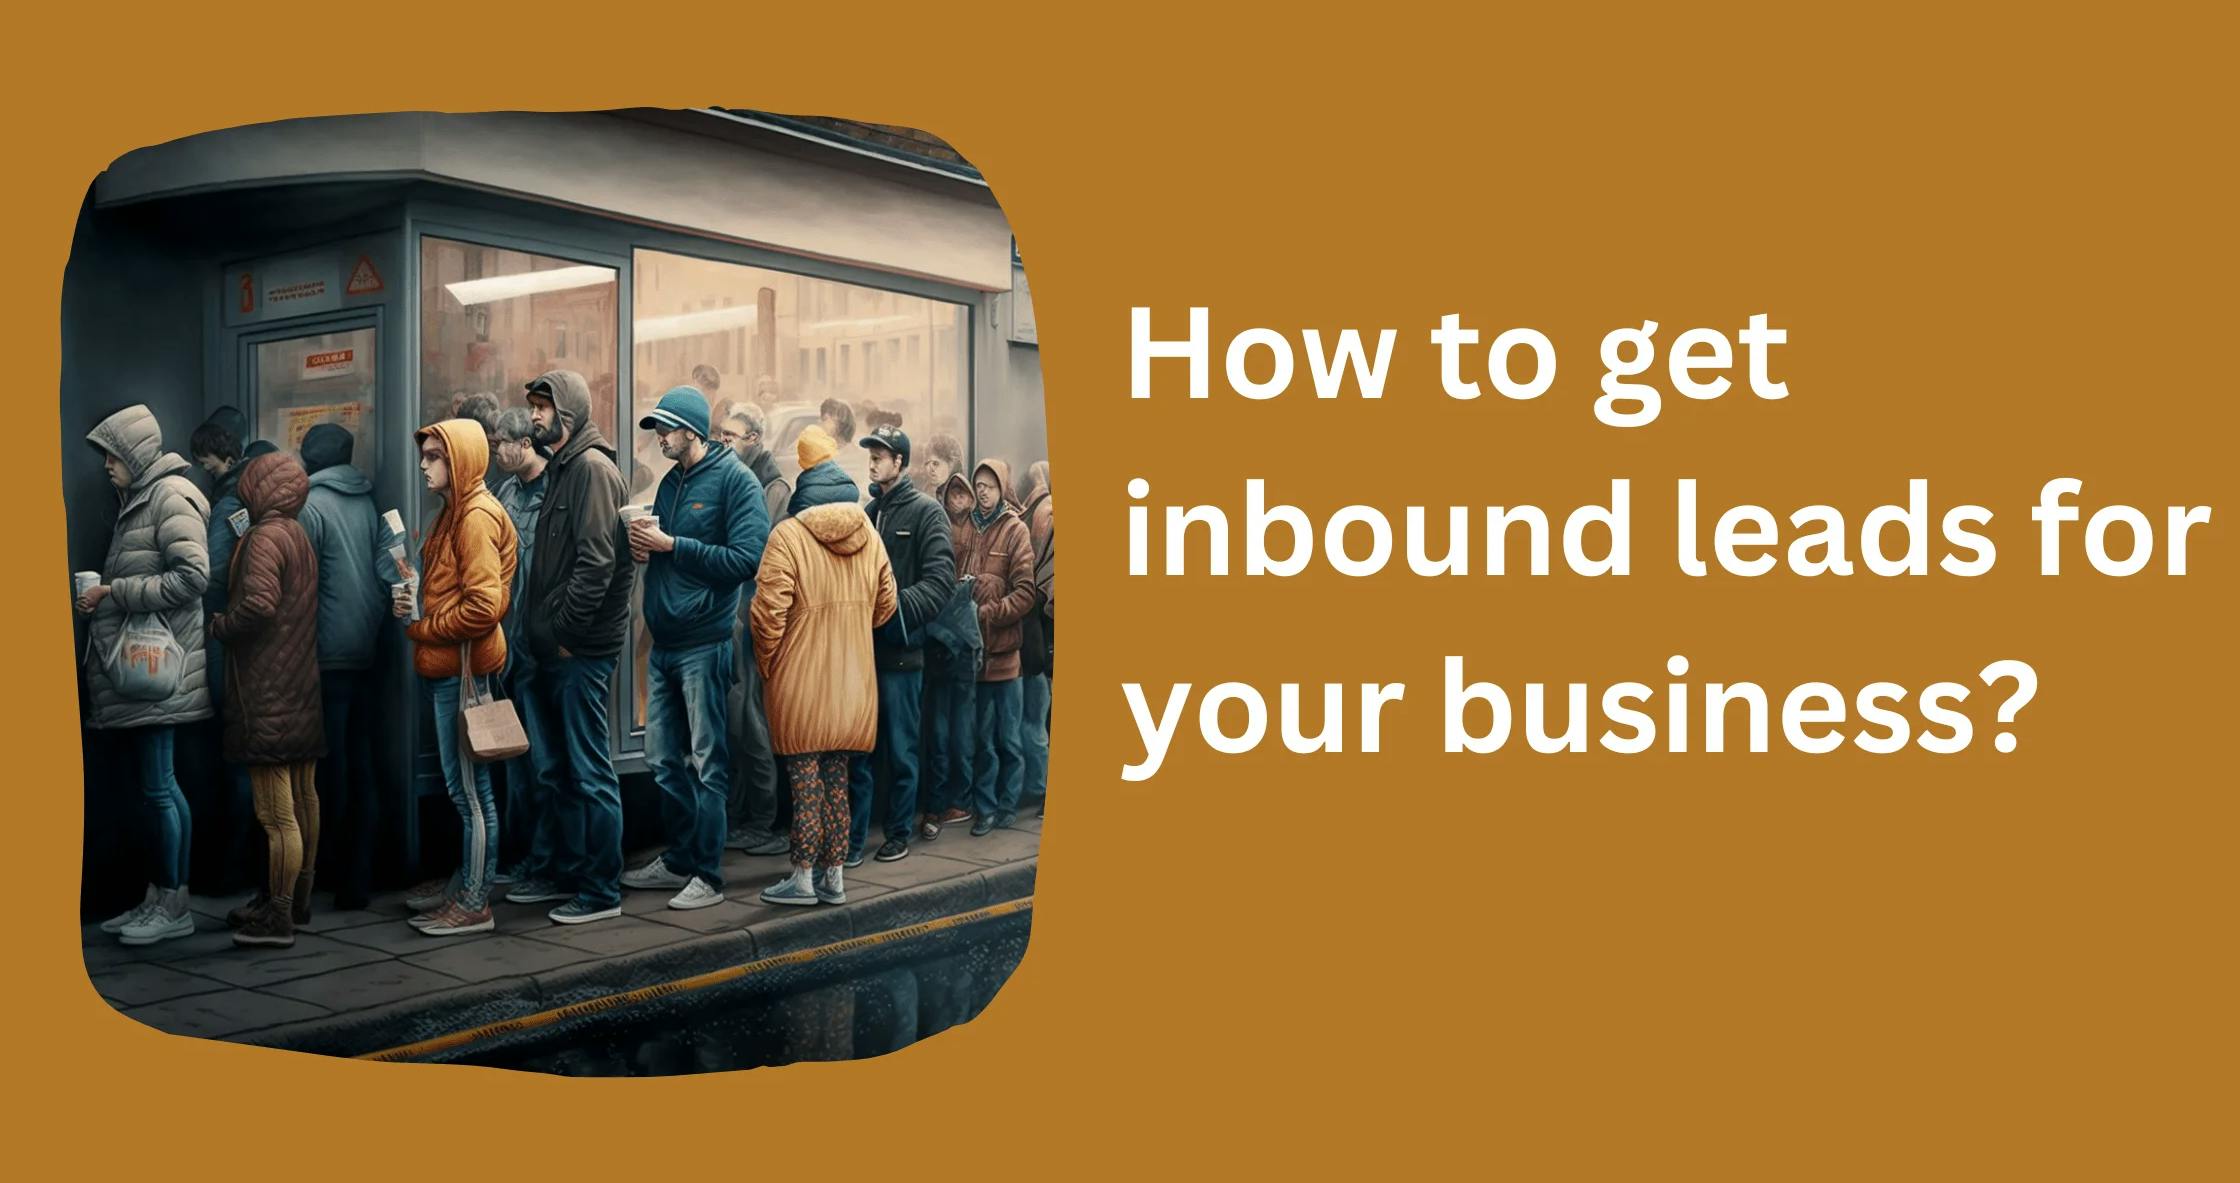 How to get inbound leads for your business?